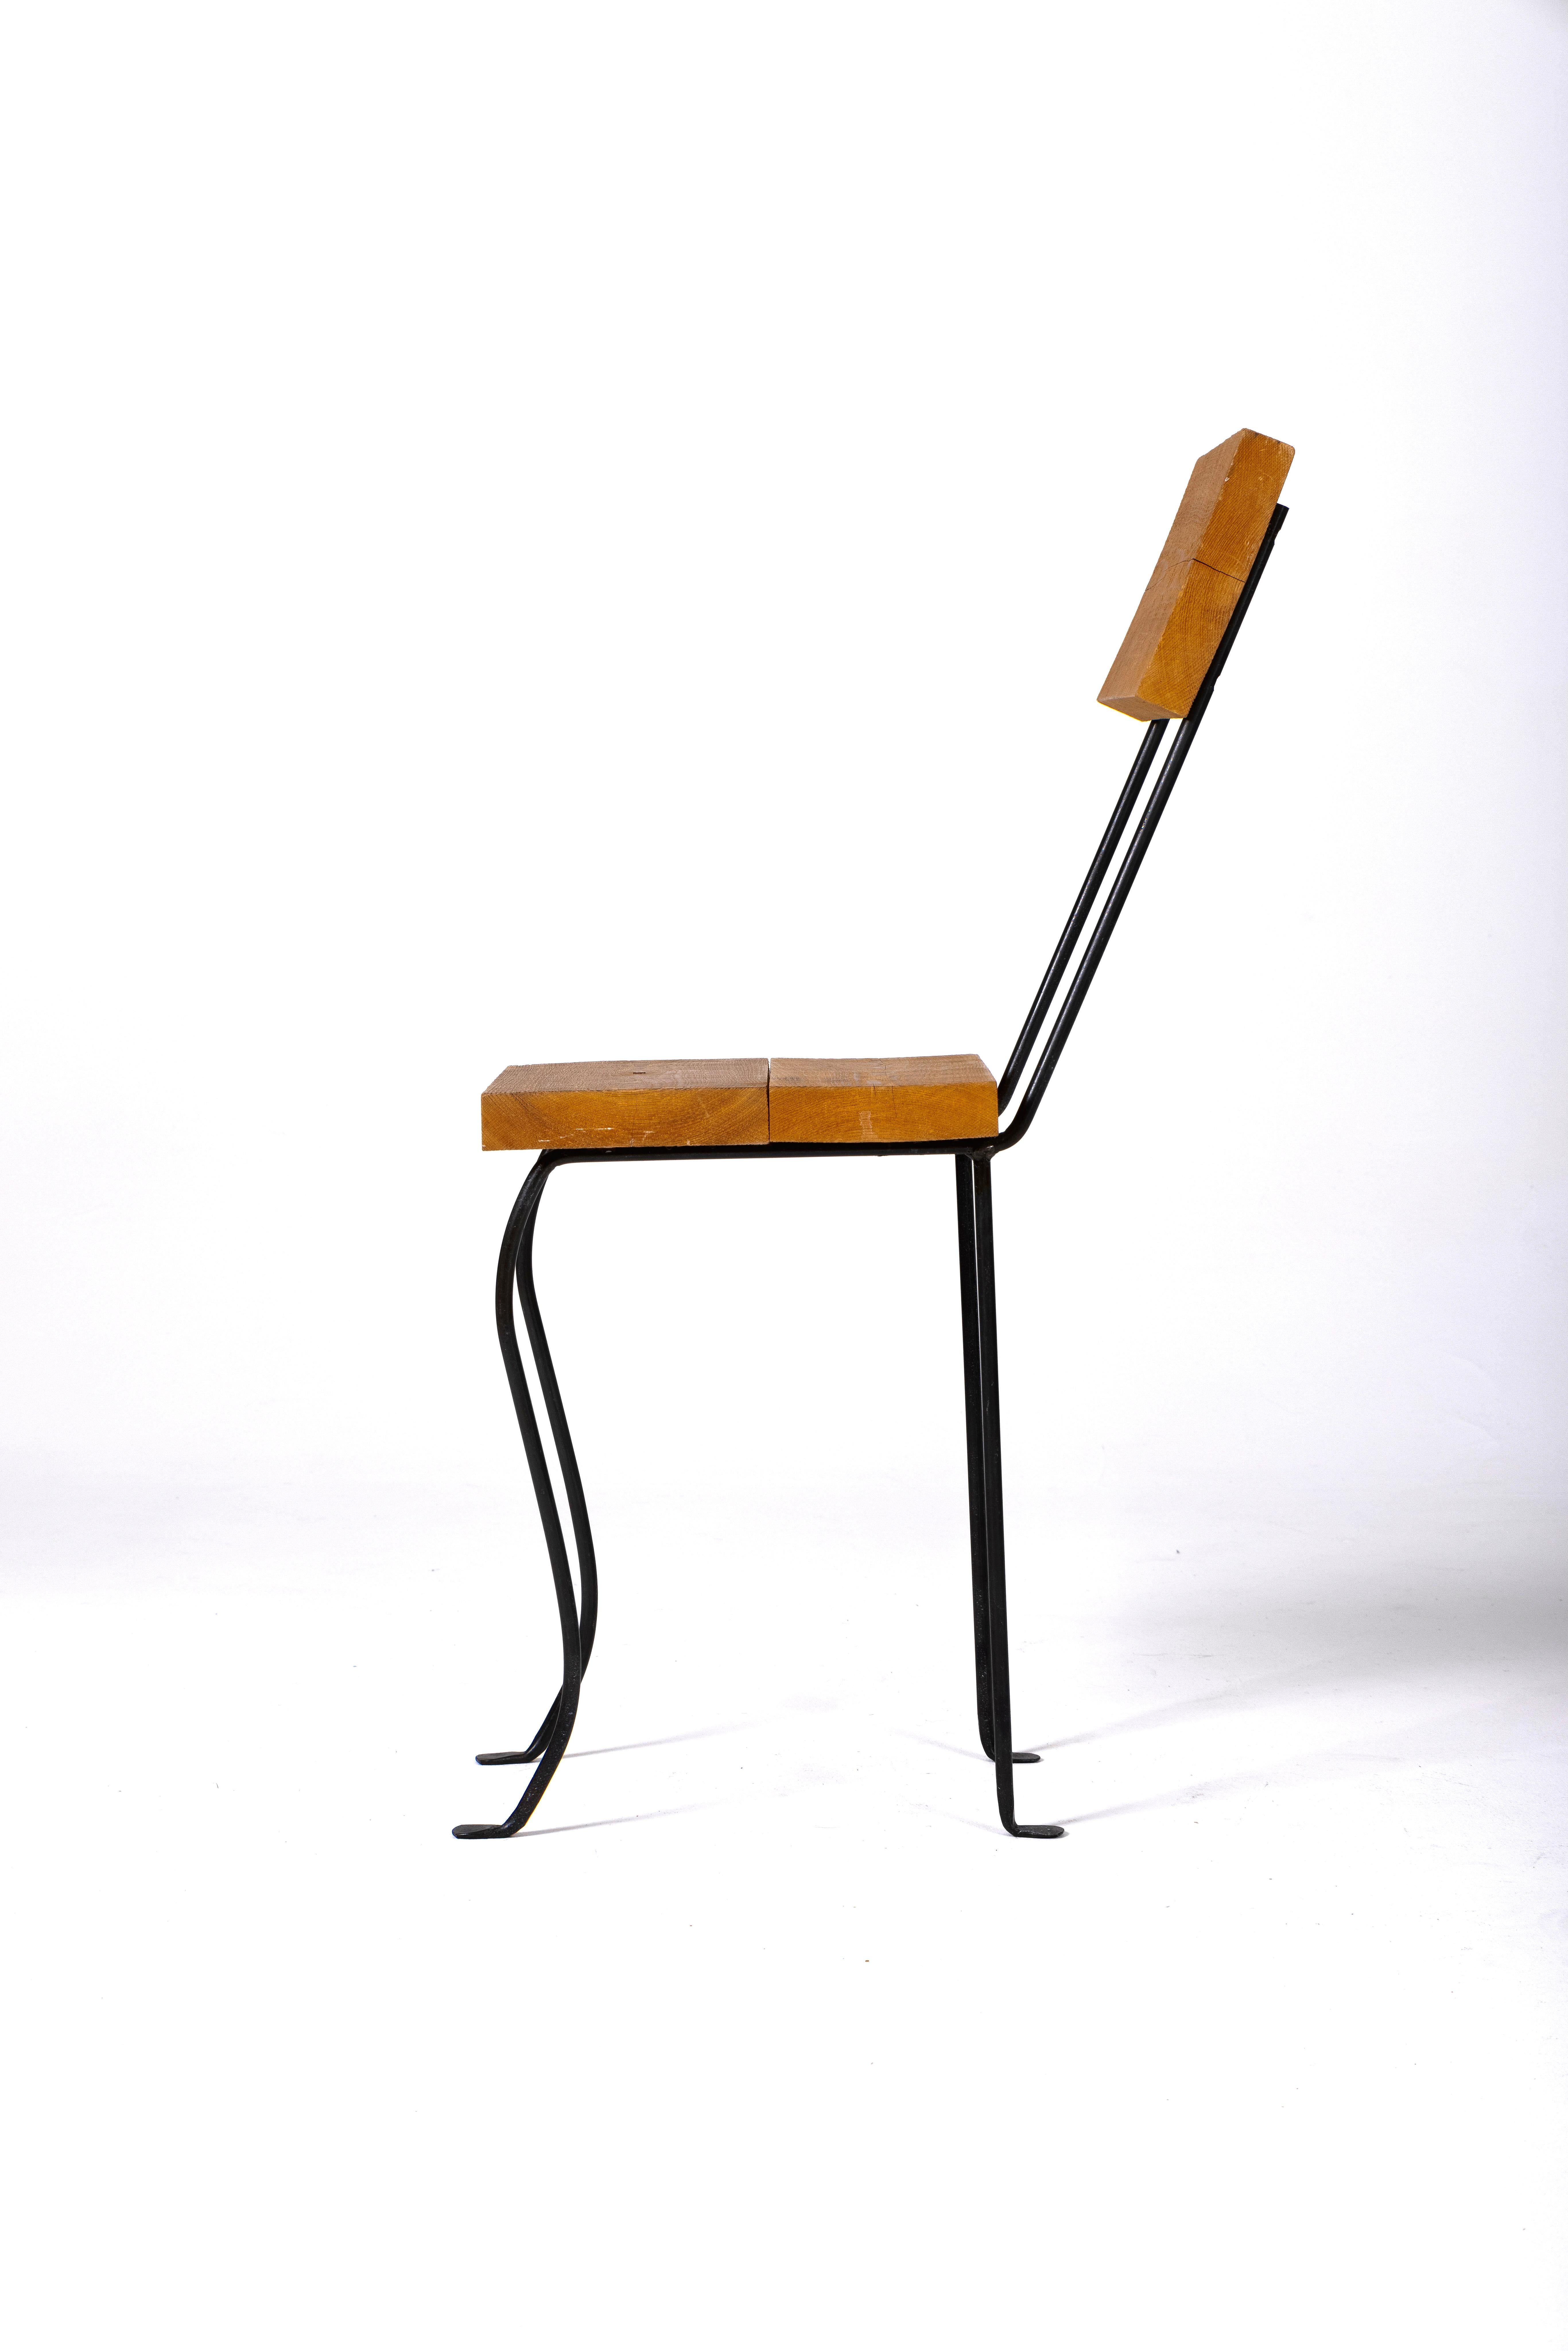 Wood and metal chair by Patrice Gruffaz For Sale 1